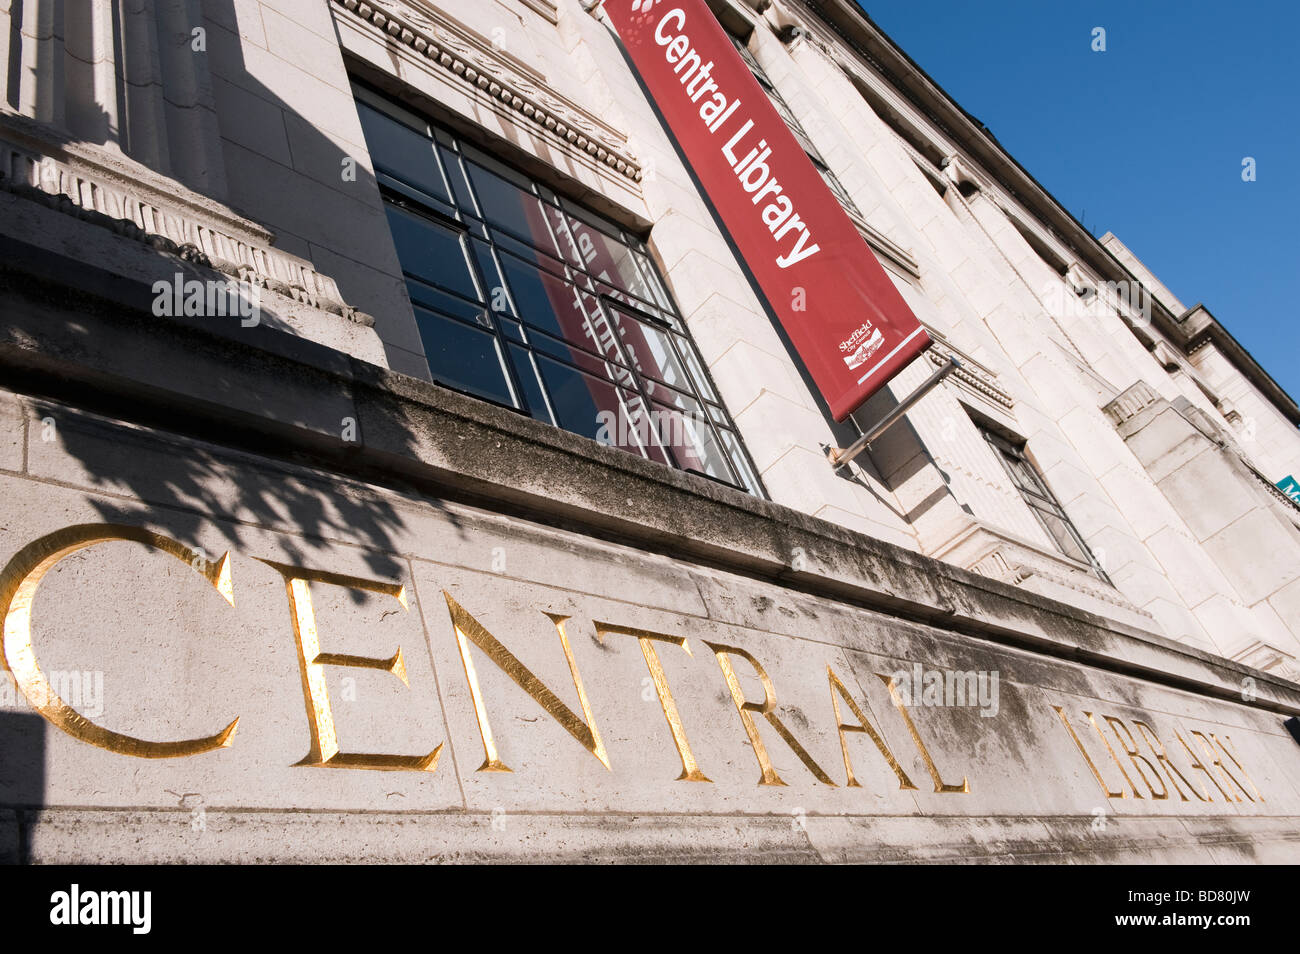 Sign for the 'Central Library' in Sheffield, 'South Yorkshire',England,'Great Britain','United Kingdom' Stock Photo